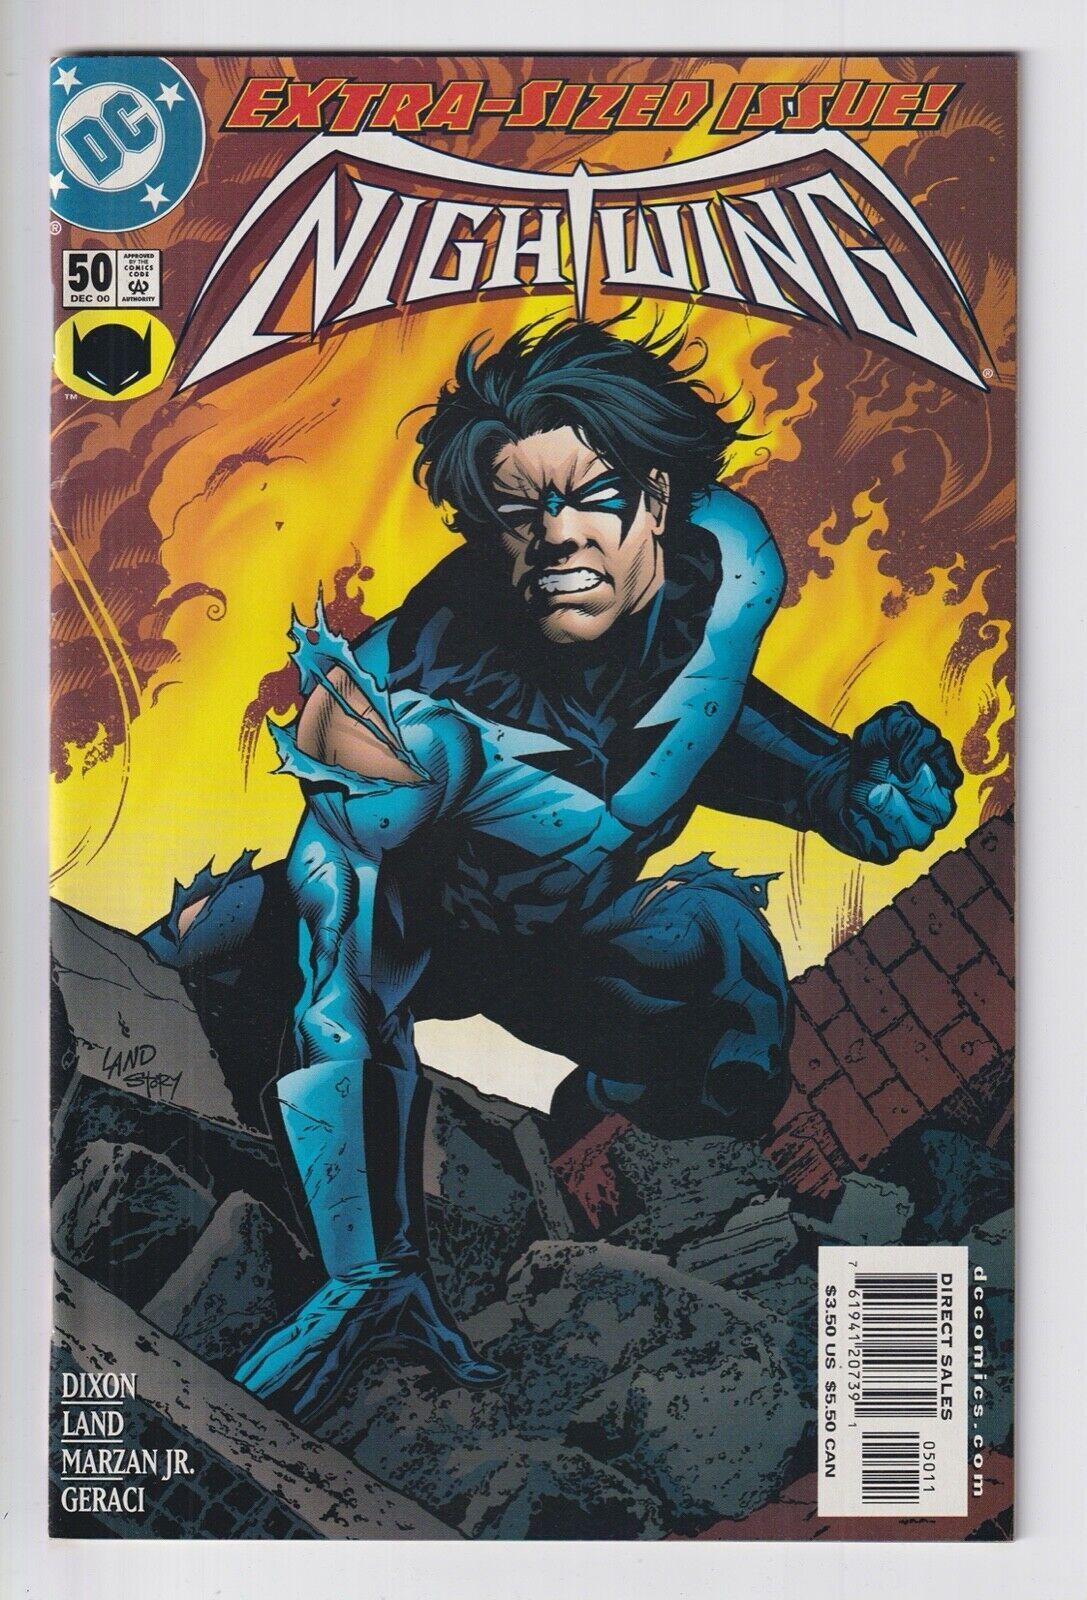 CLEARANCE: NIGHTWING vol 2 VG 1996 DC comics sold SEPARATELY you PICK